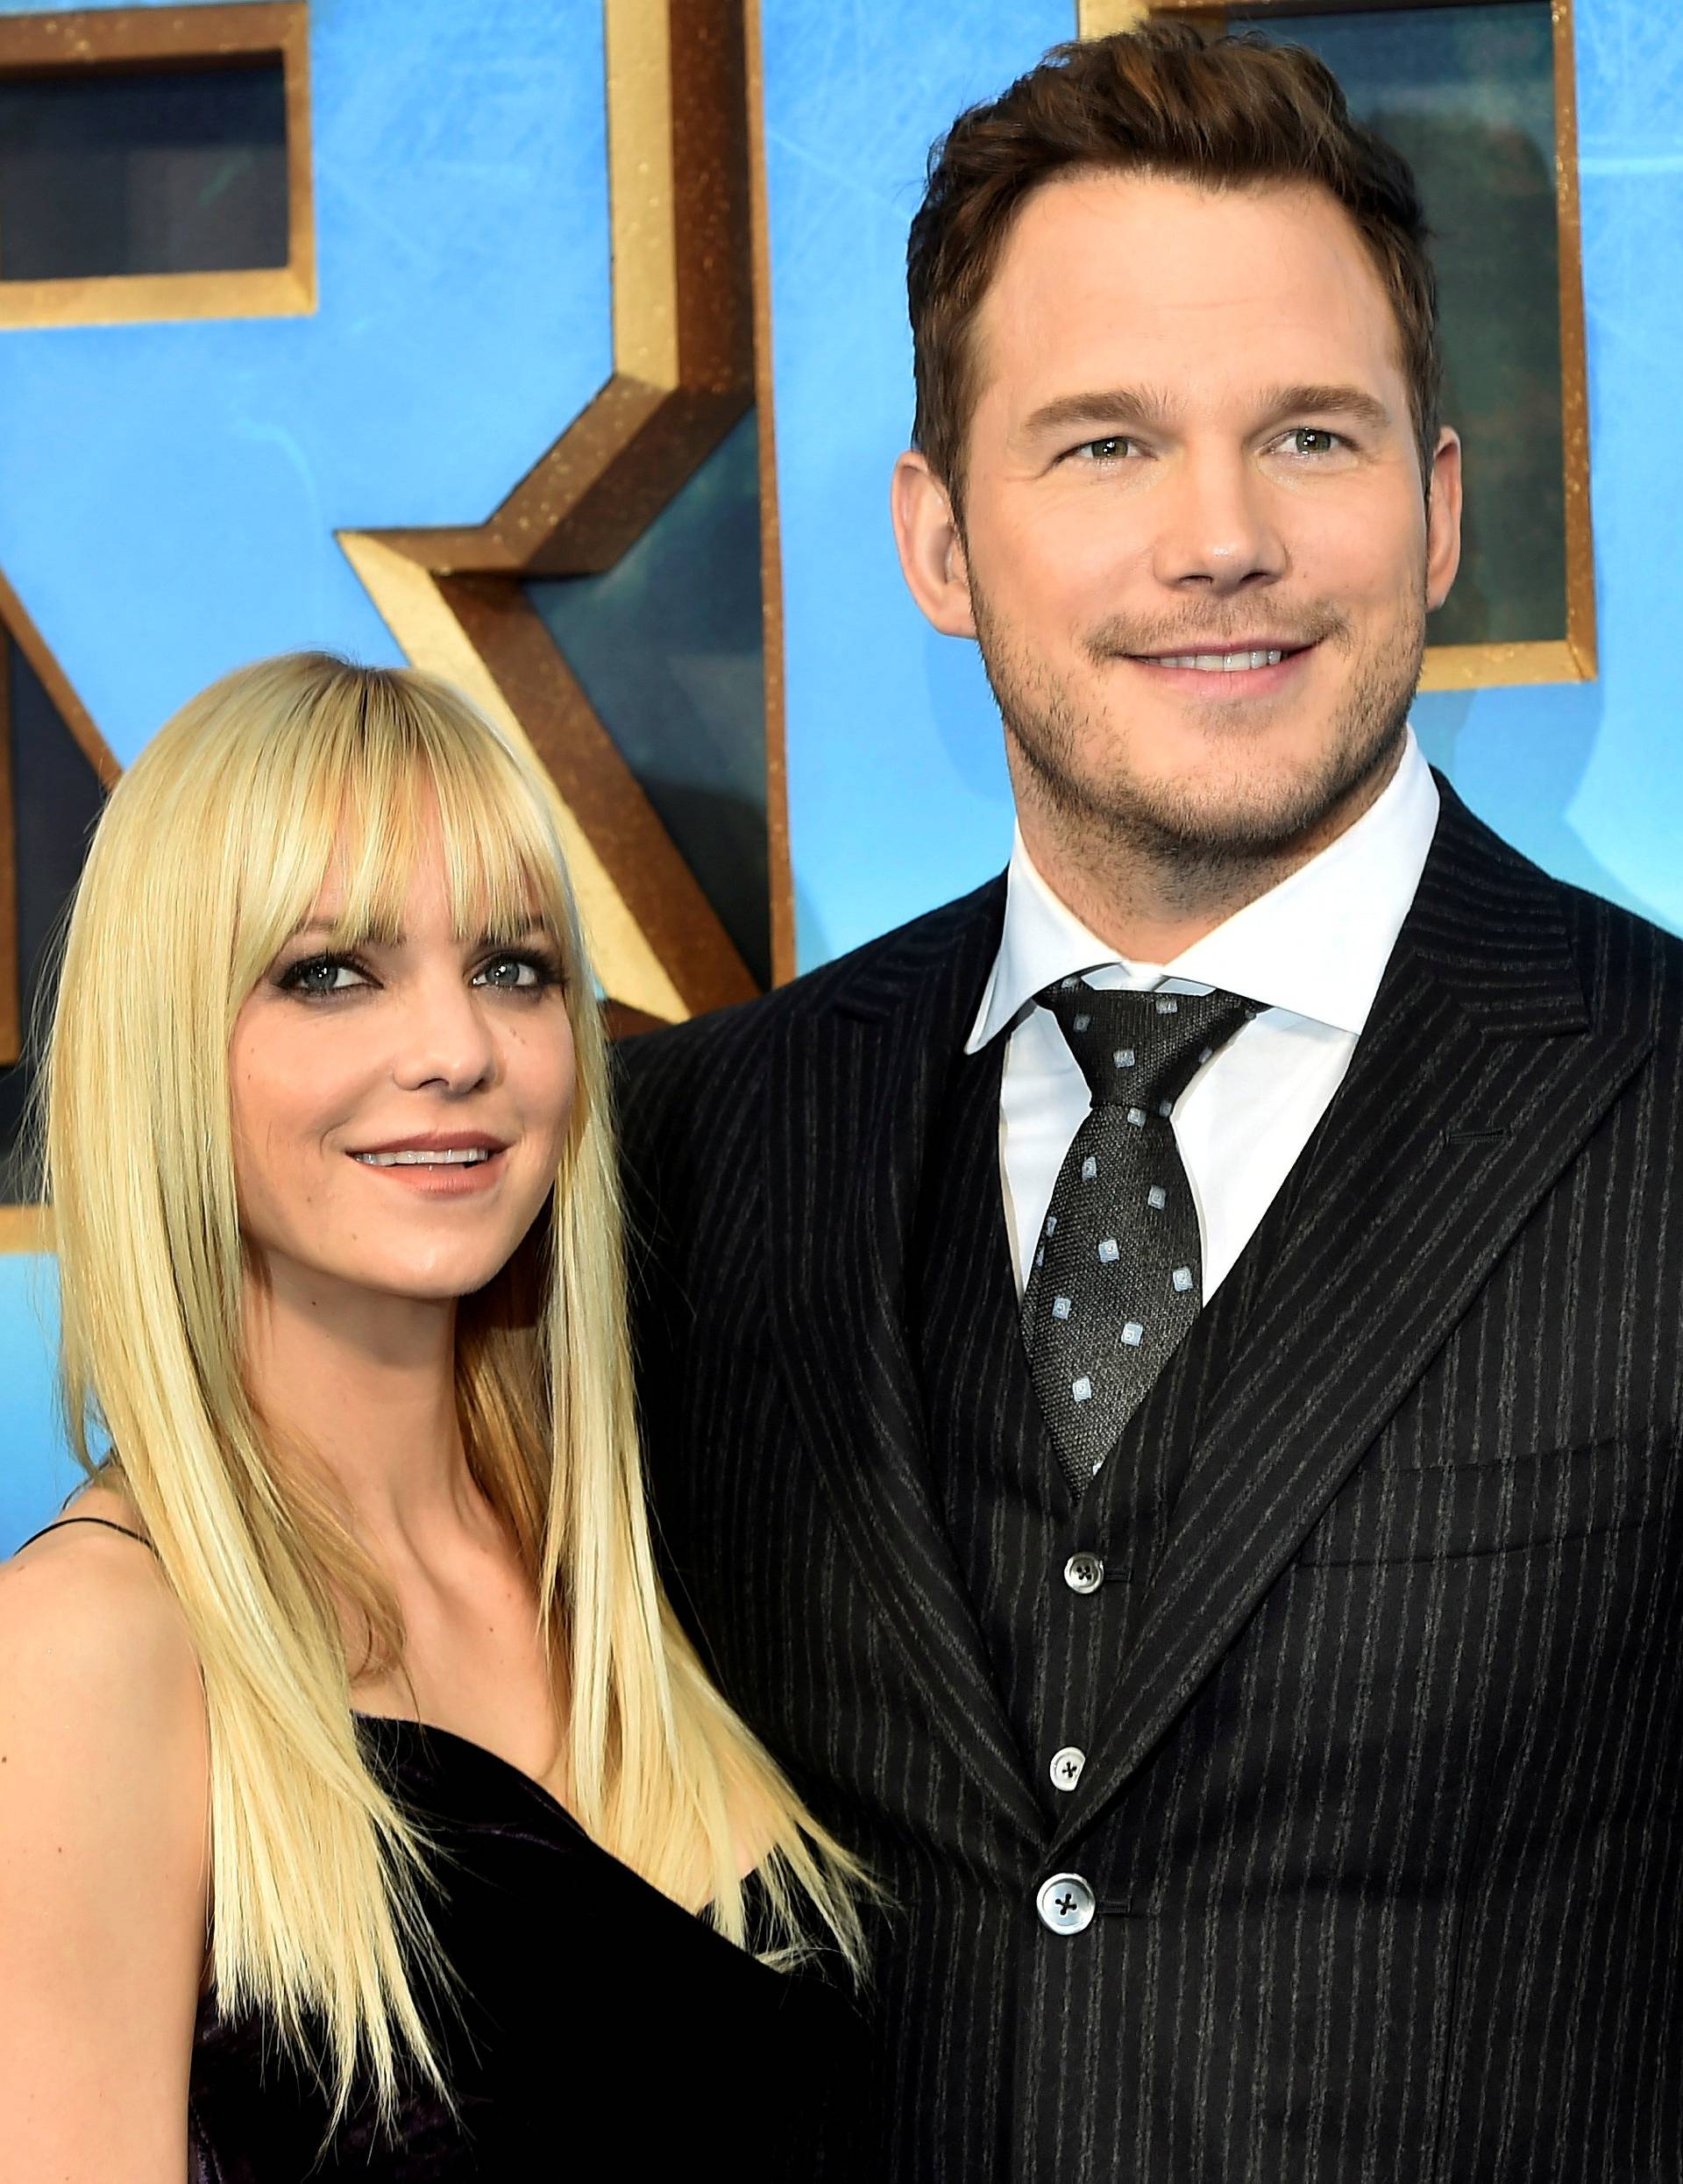 FILE PHOTO Chris Pratt poses with his wife Anna Faris as they attend a premiere of the film "Guardians of the galaxy, Vol. 2" in London